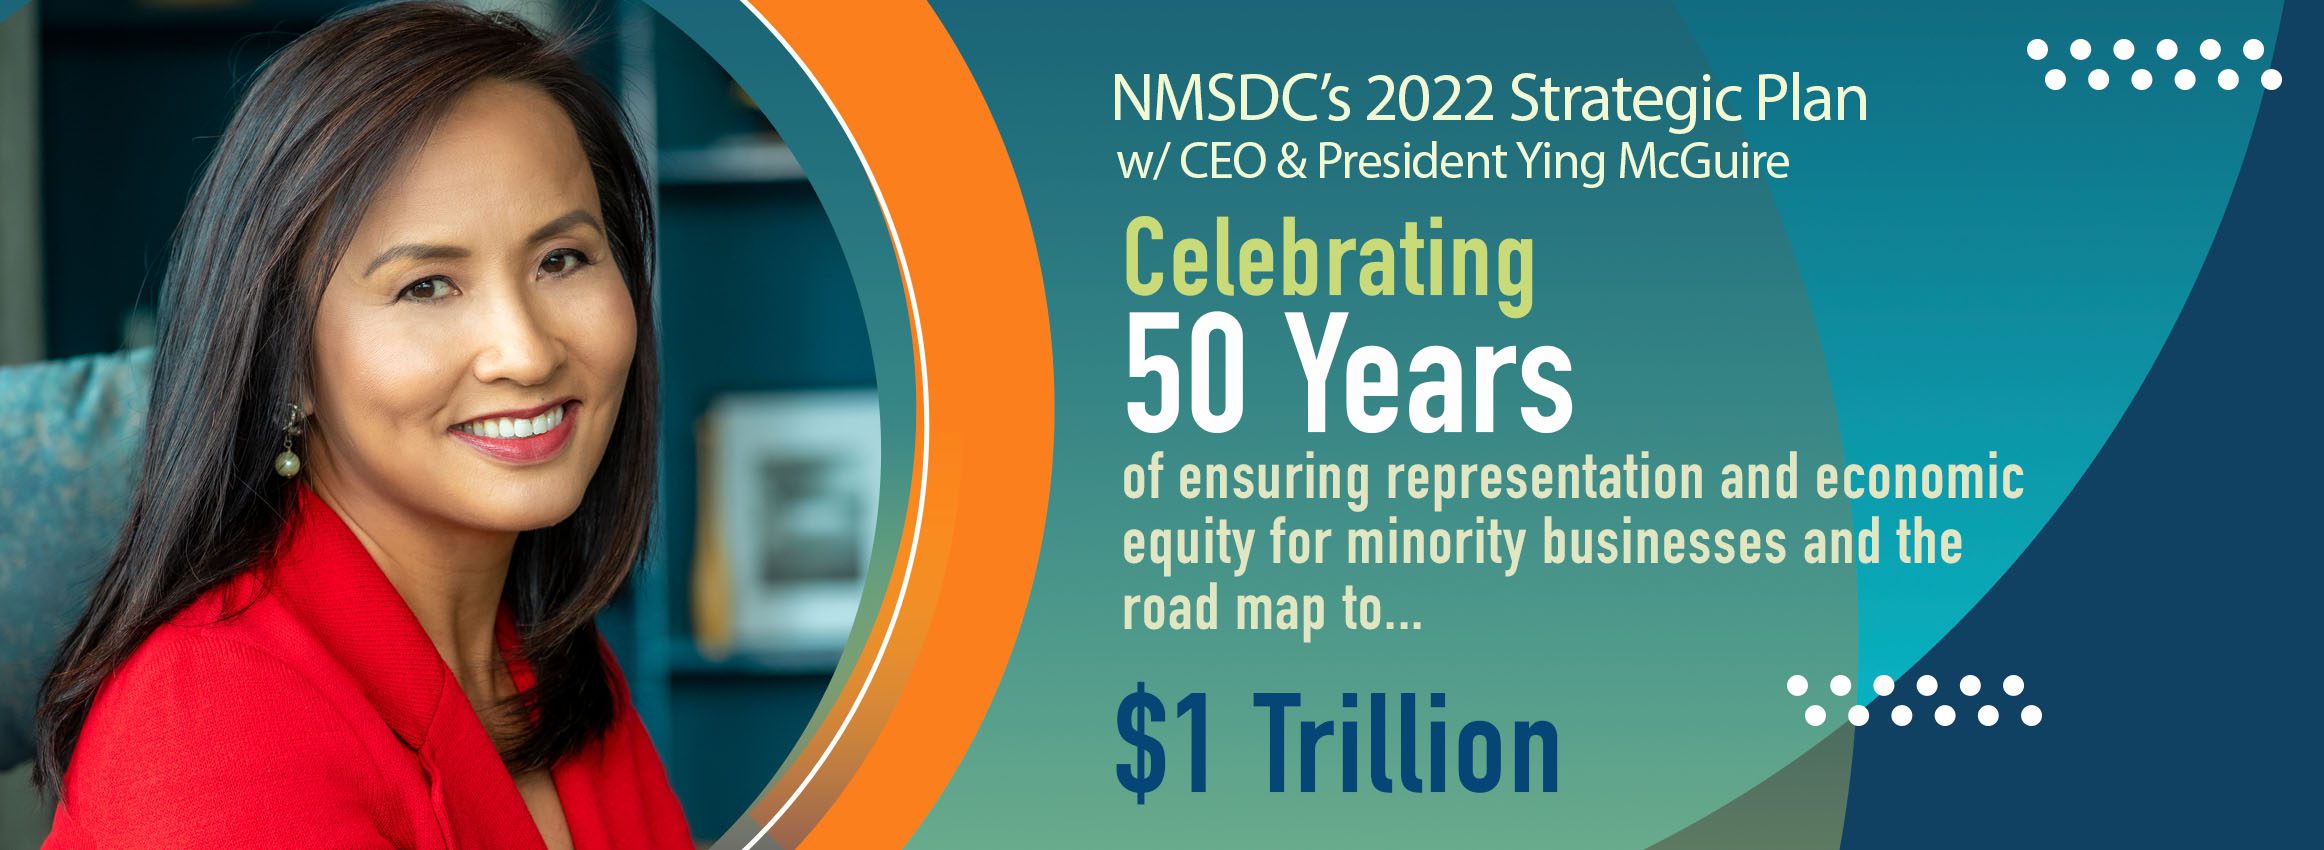 NMSDC’s 2022 Strategic Plan w/ CEO & President Ying McGuire National